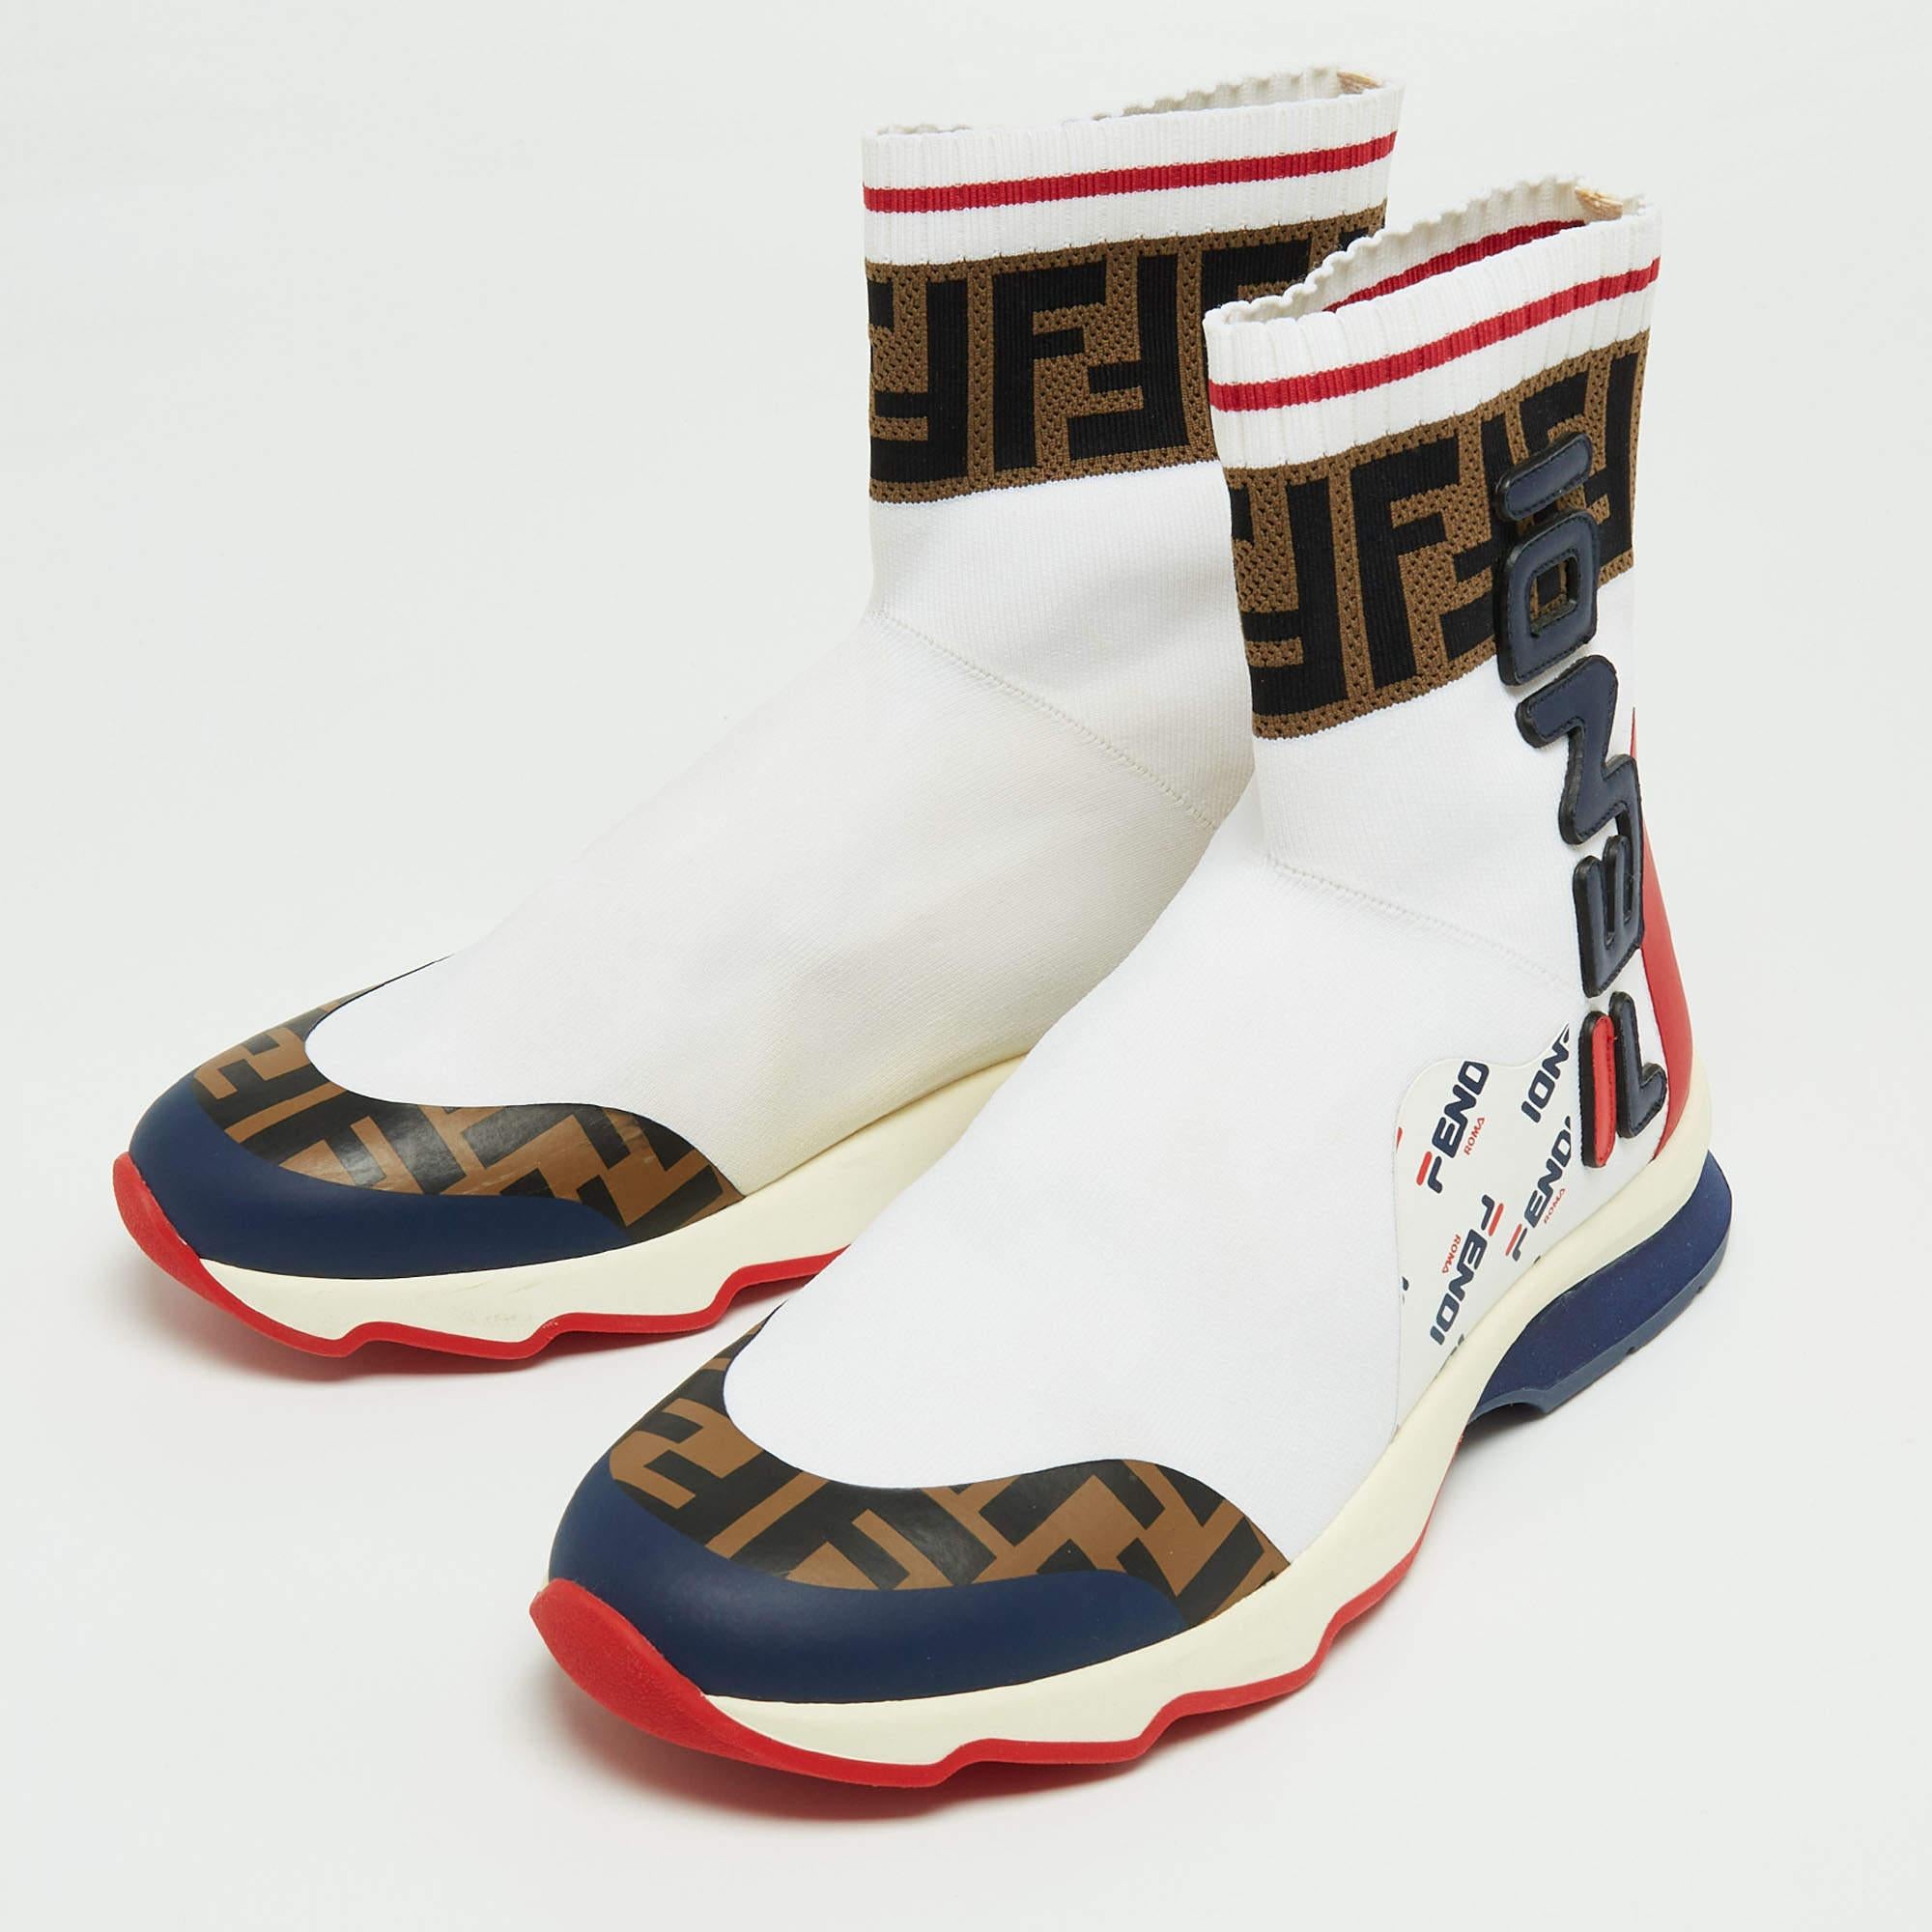 Give your outfit a luxe update with this pair of Fendi x Fila sneakers. The shoes are sewn perfectly to help you make a statement in them for a long time.

